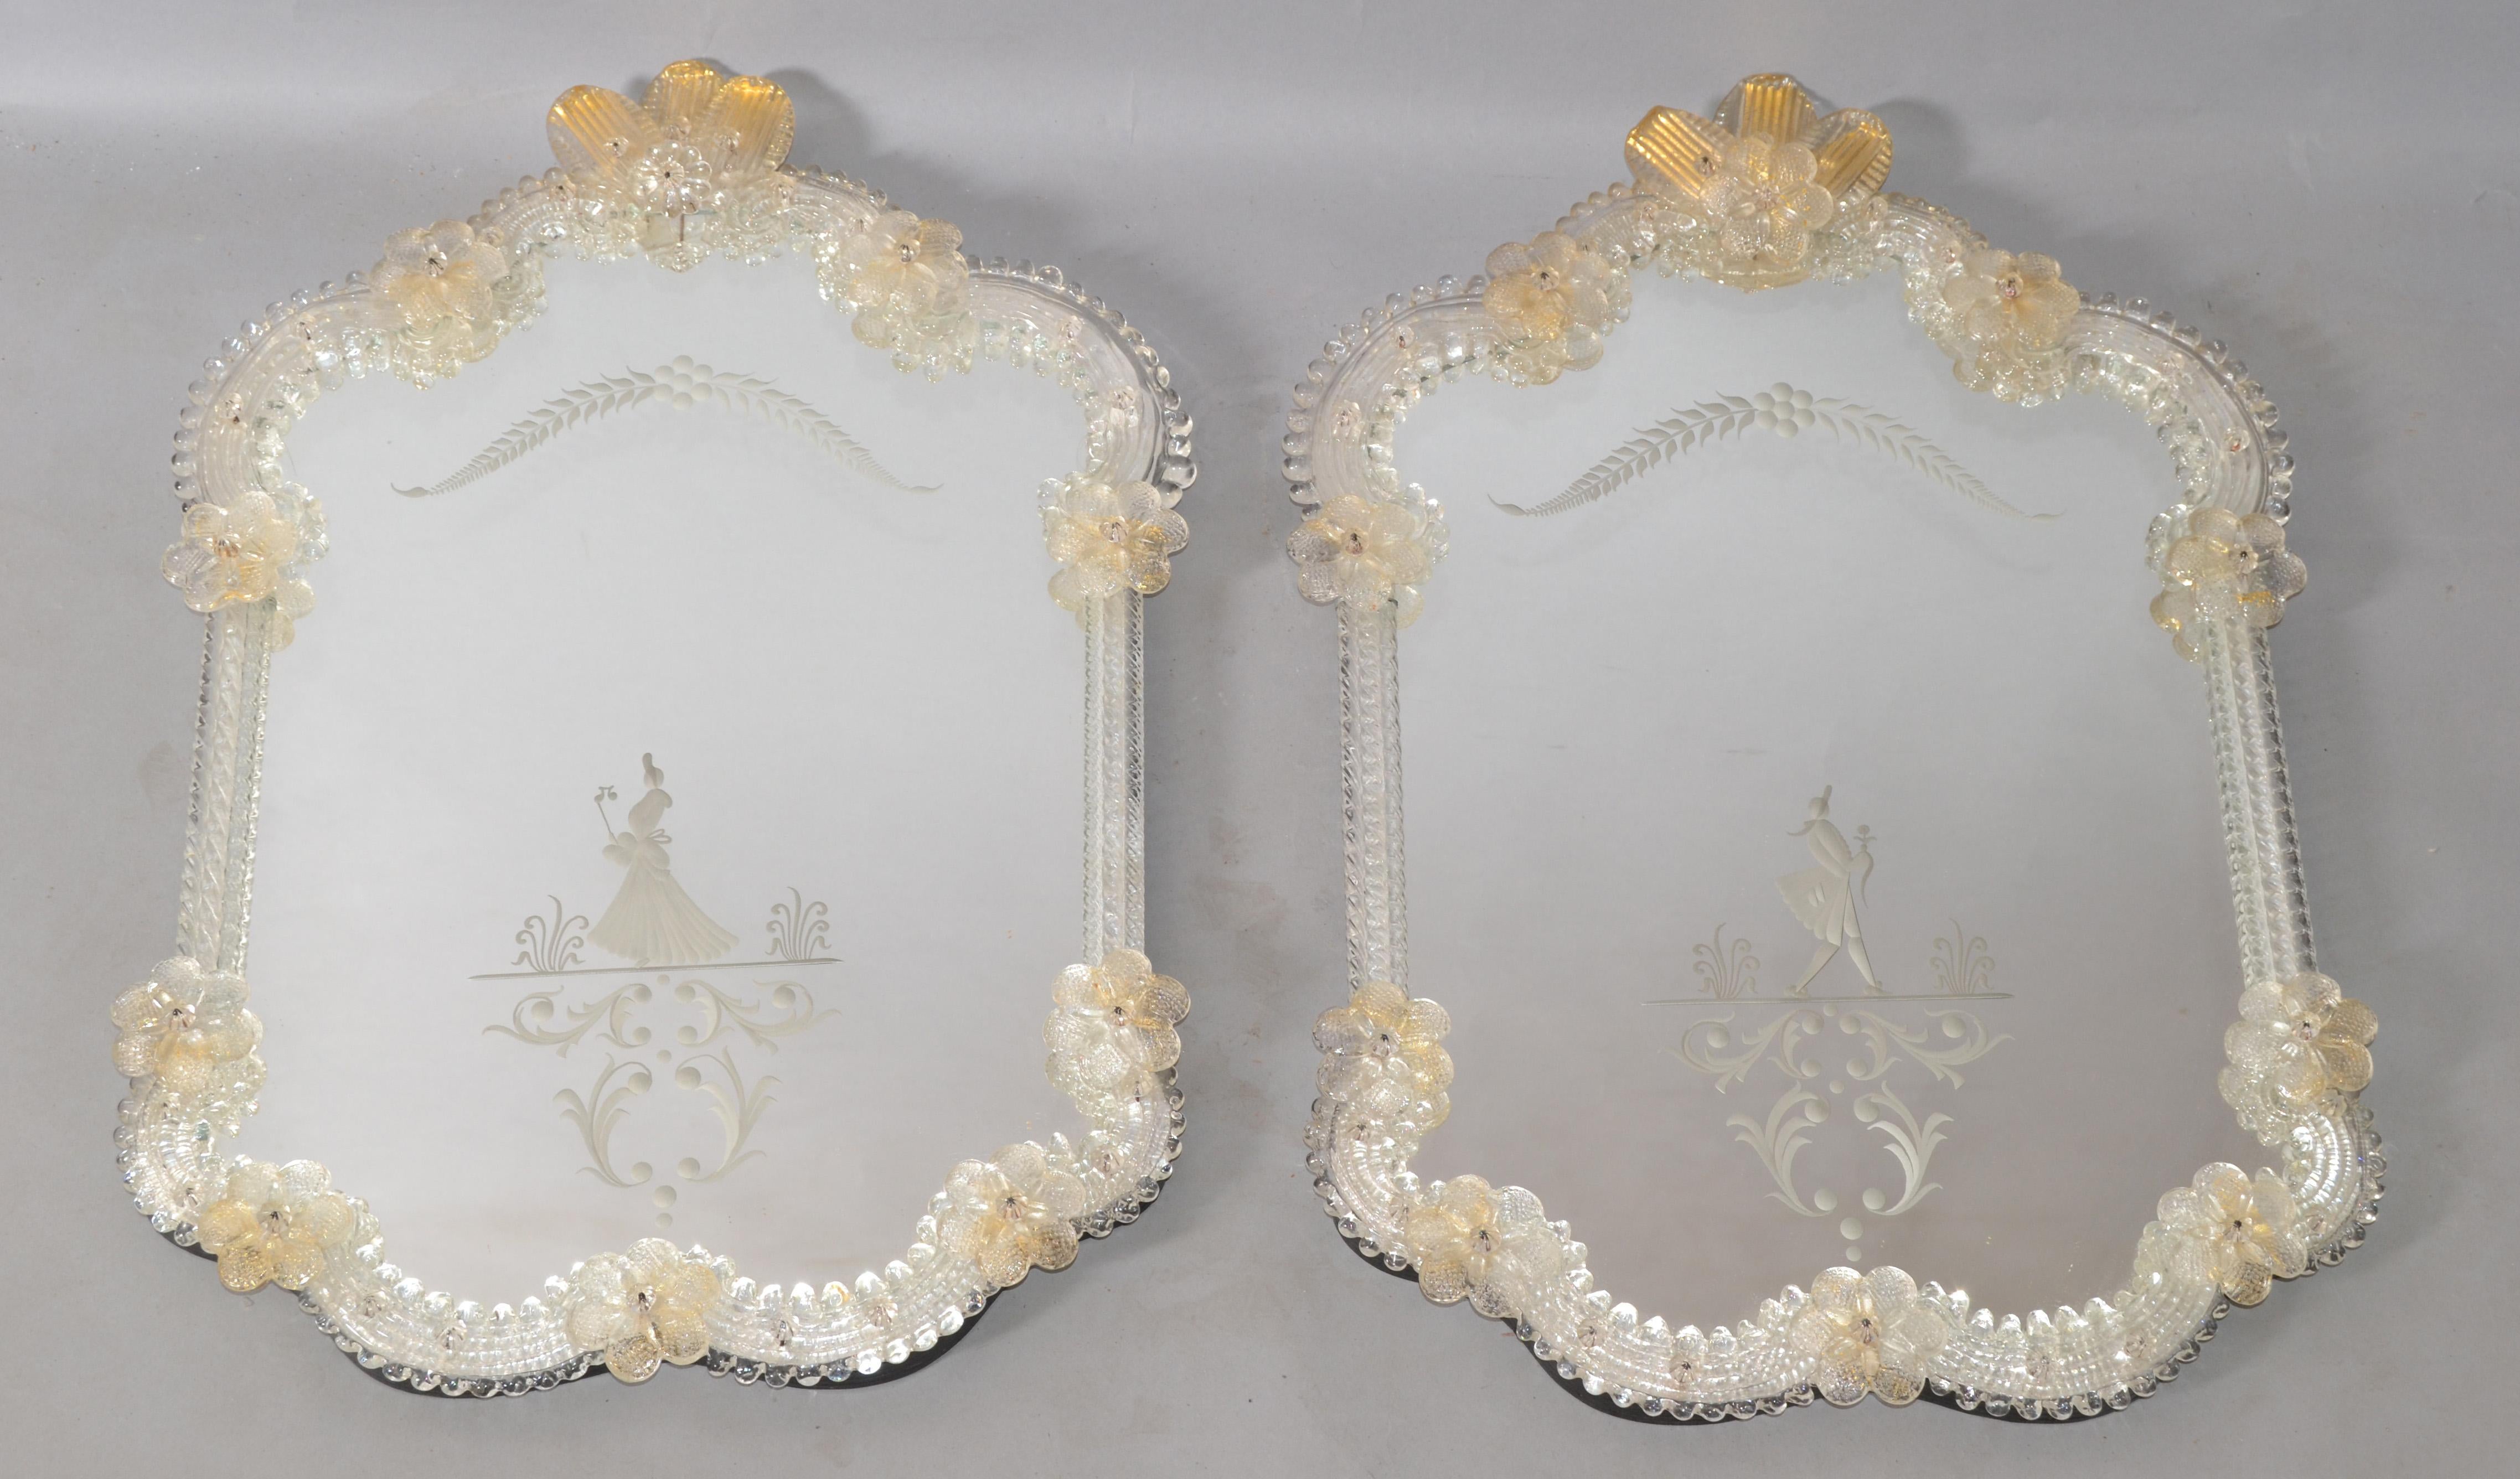 Rococo Revival Him and Her Etched Venetian Wall Mirror Bohemian Golden Flowers For Sale 2